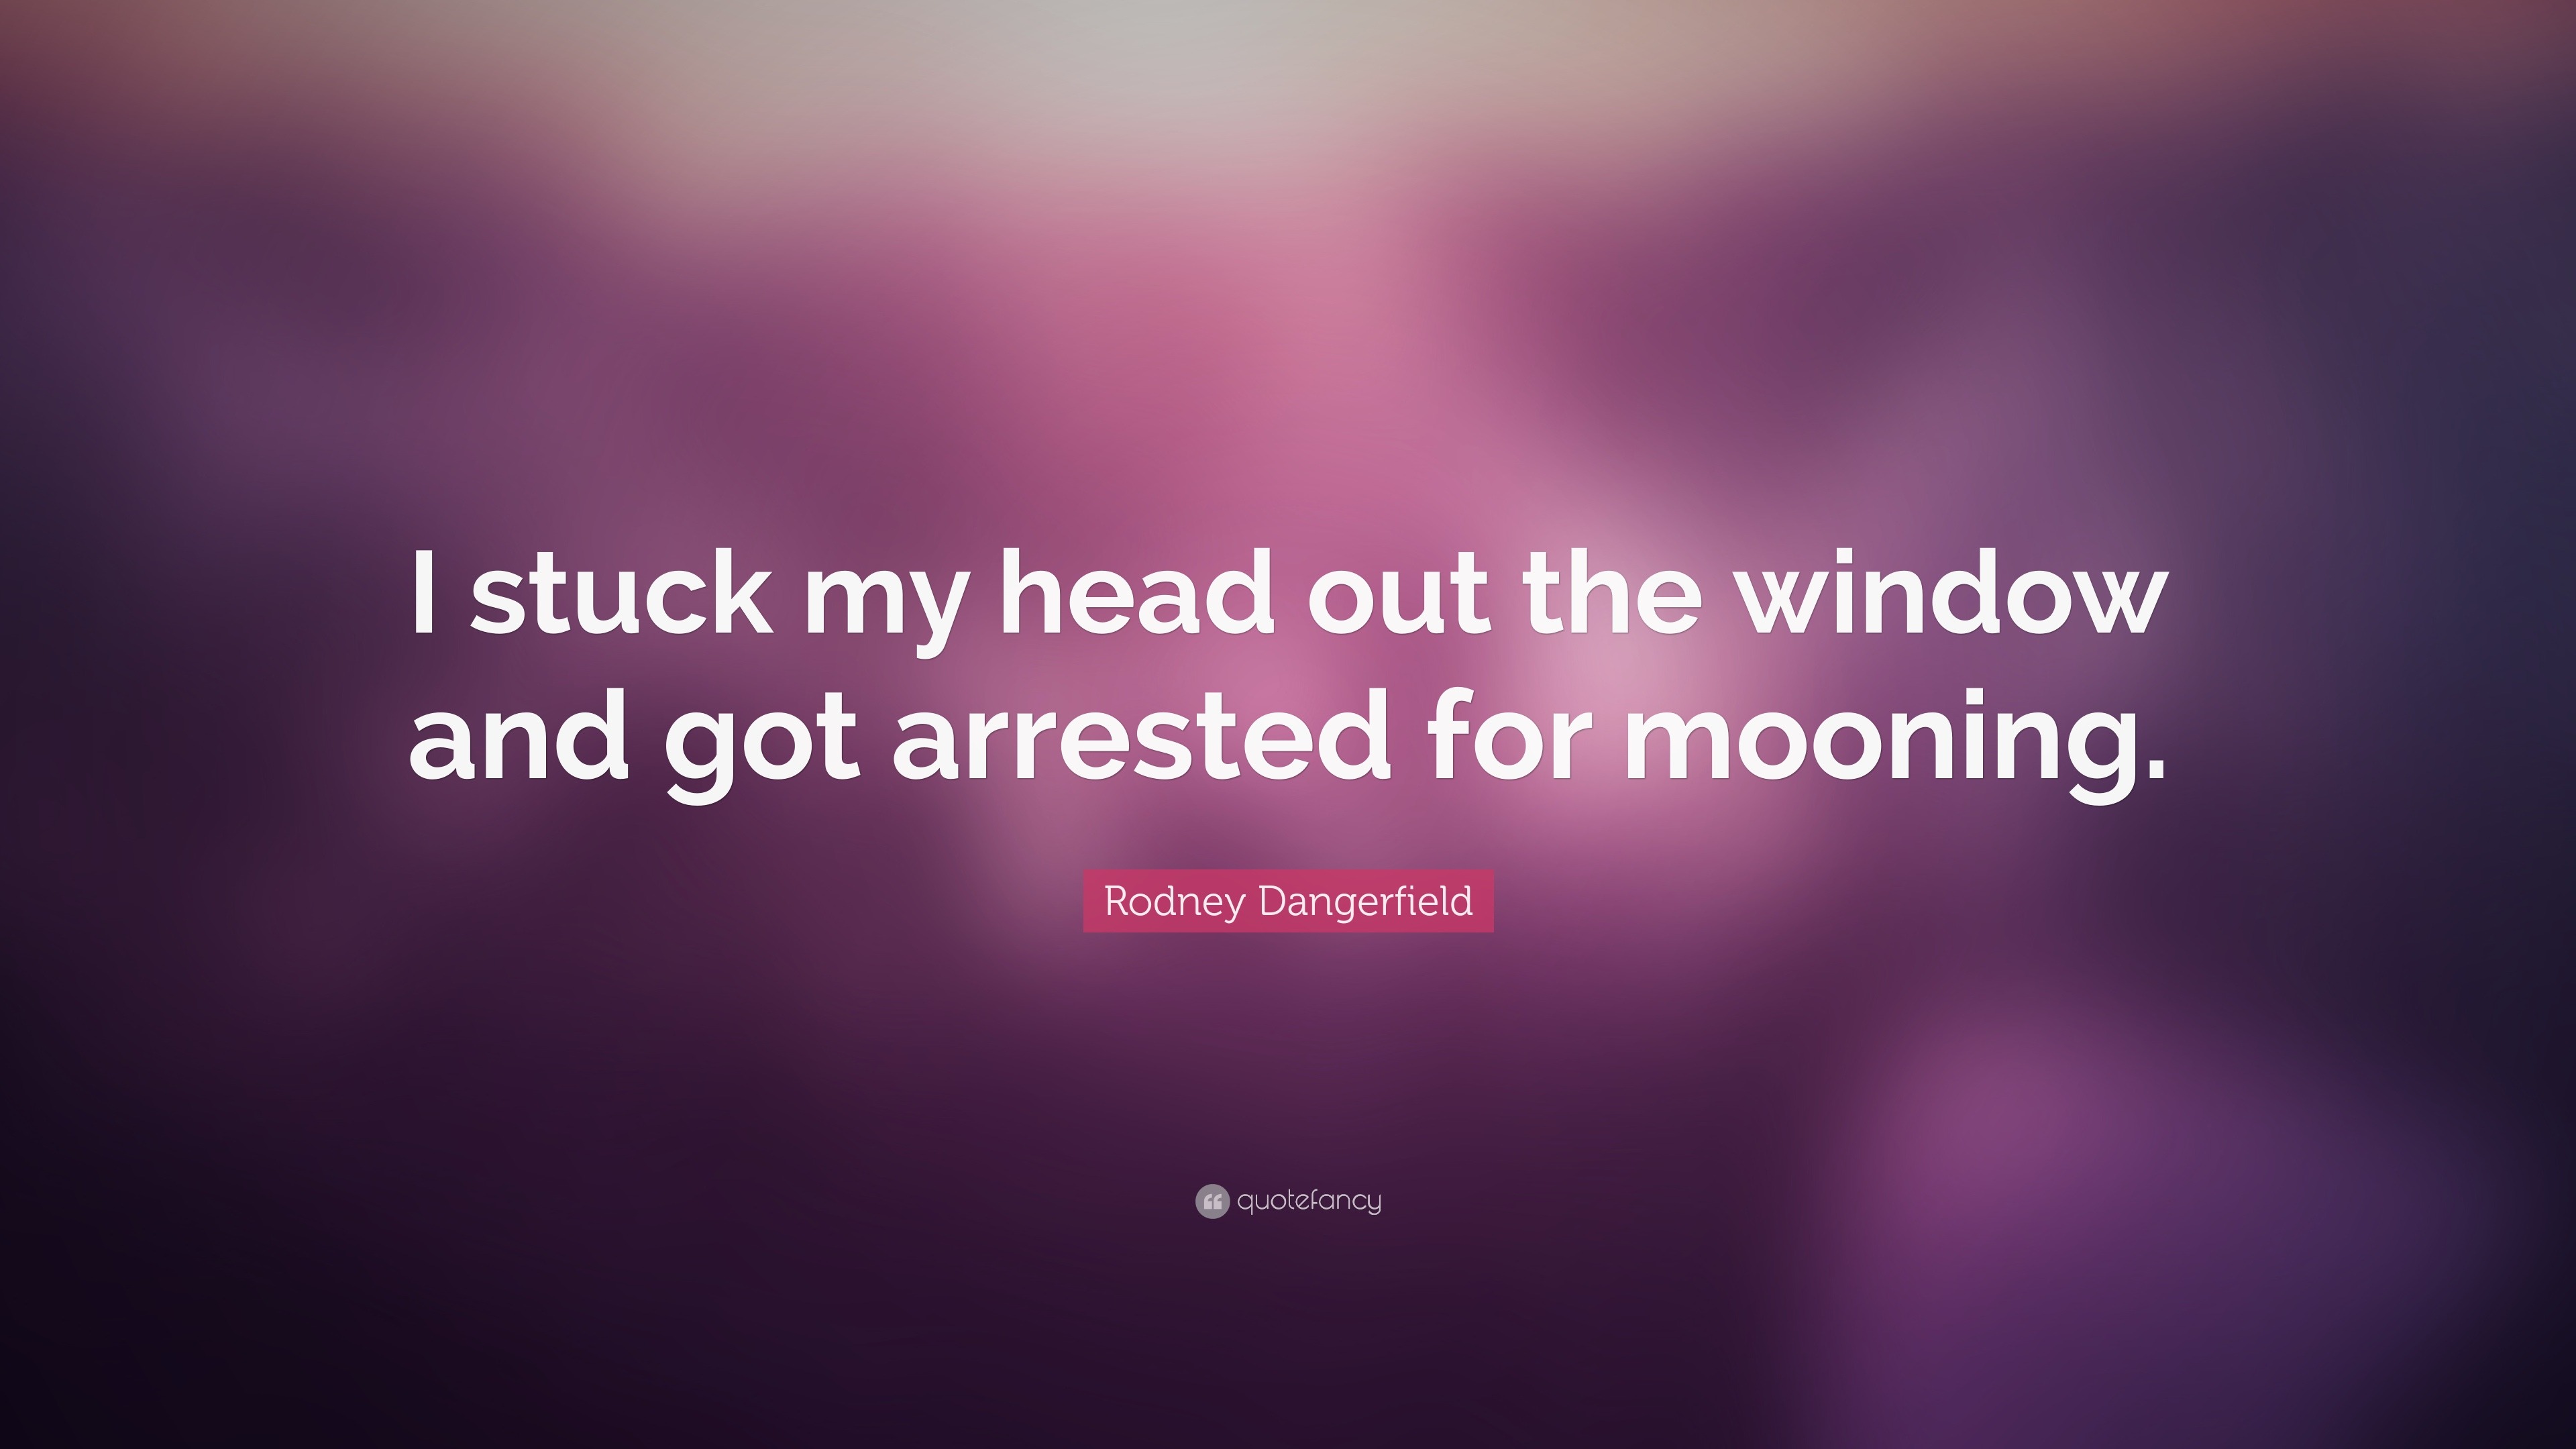 Rodney Dangerfield Quote I Stuck My Head Out The Window And Got Arrested For Mooning